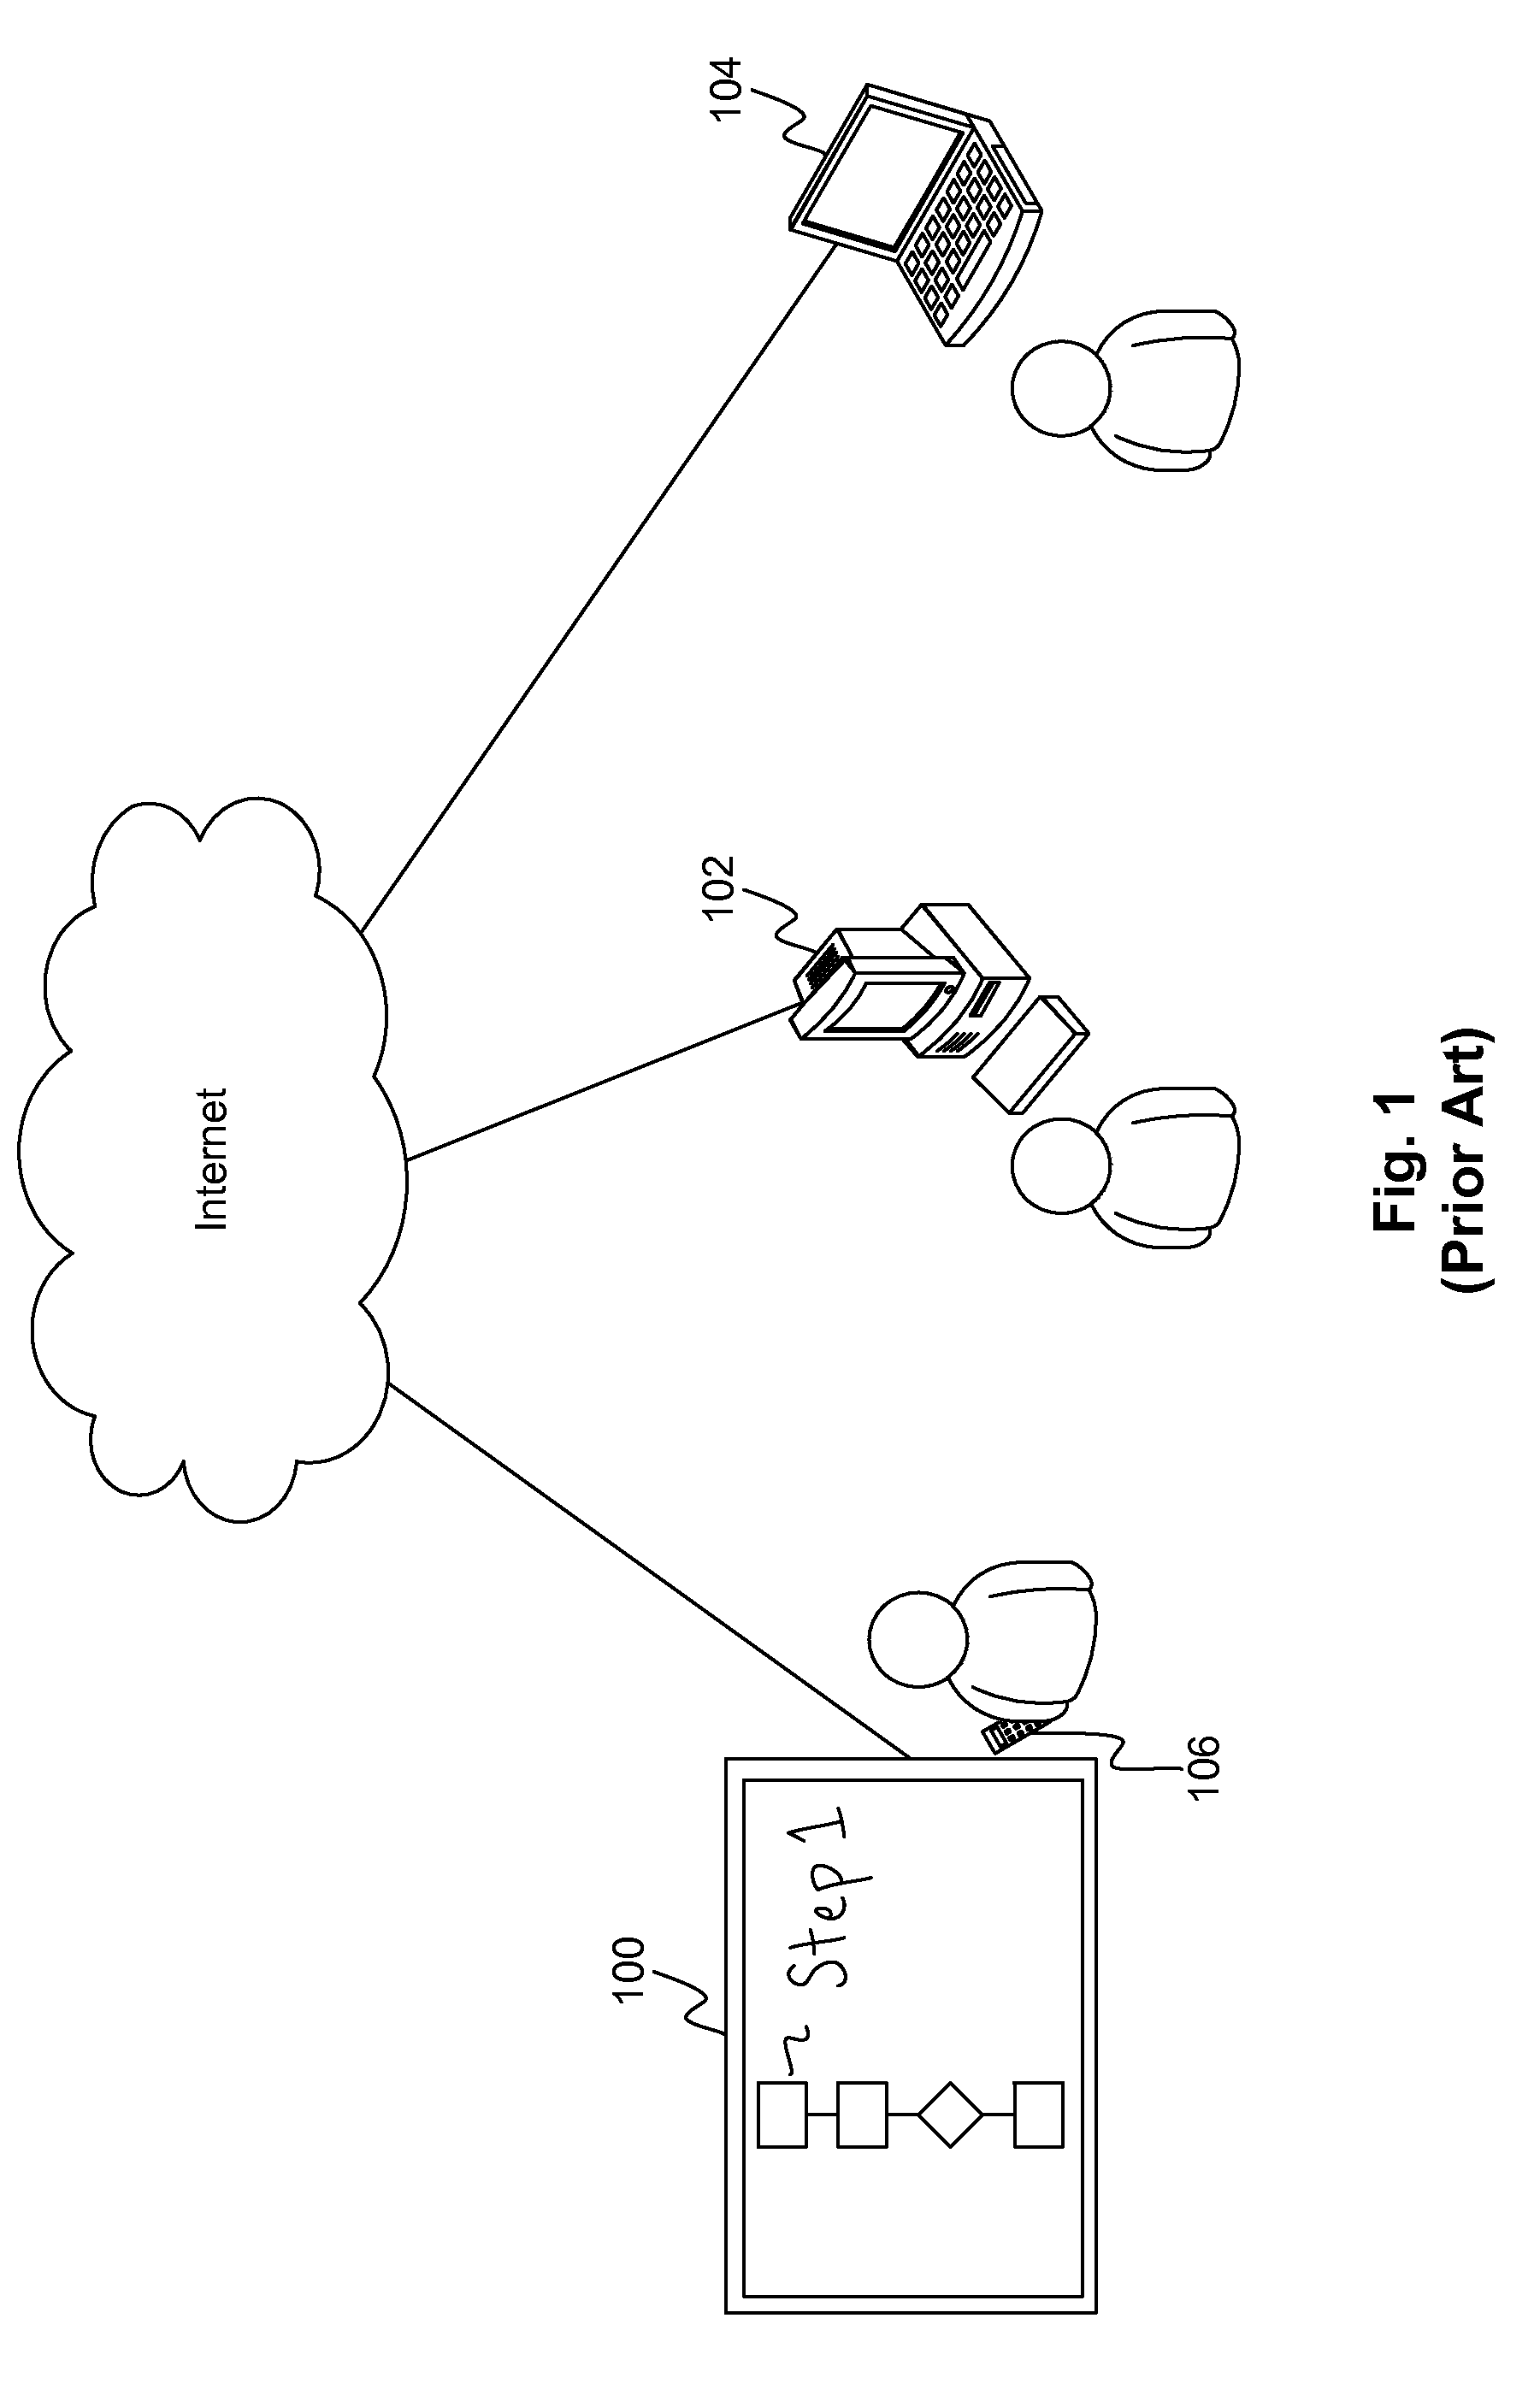 Systems and Methods for Operating a Virtual Whiteboard Using a Mobile Phone Device